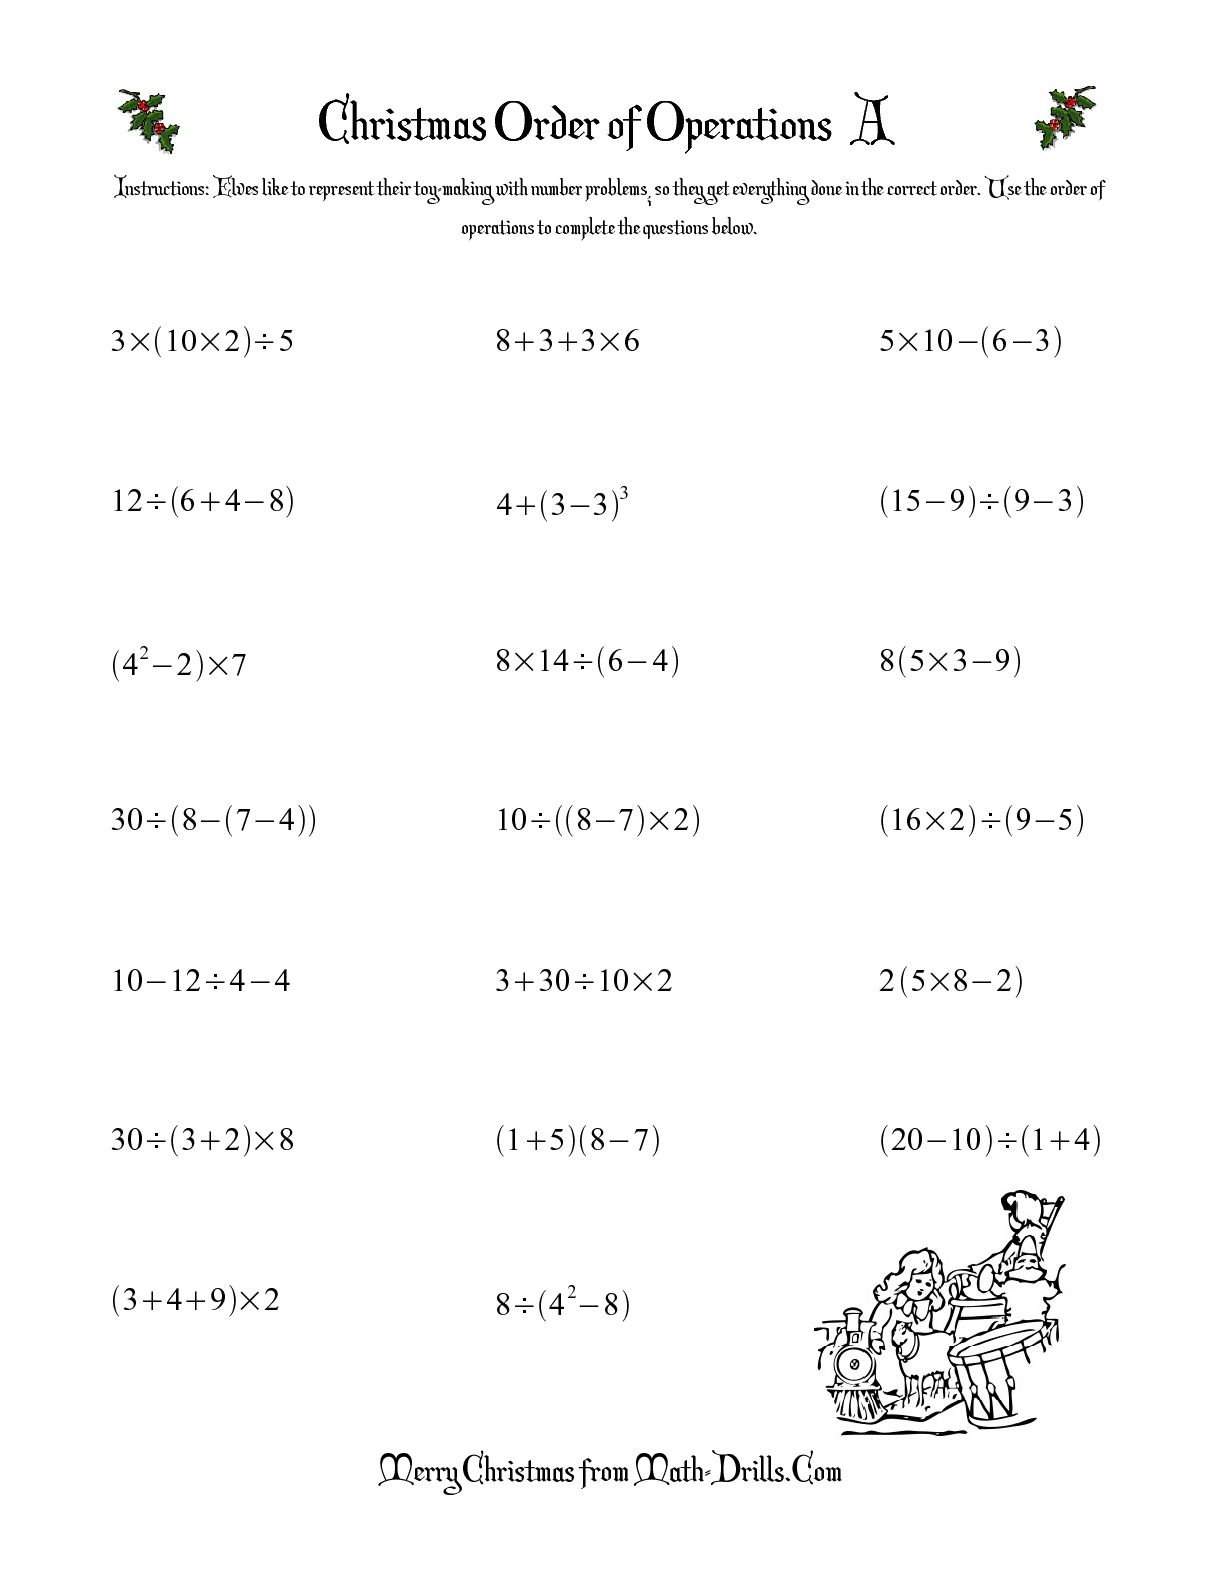 Order of Operations Math Worksheets Image